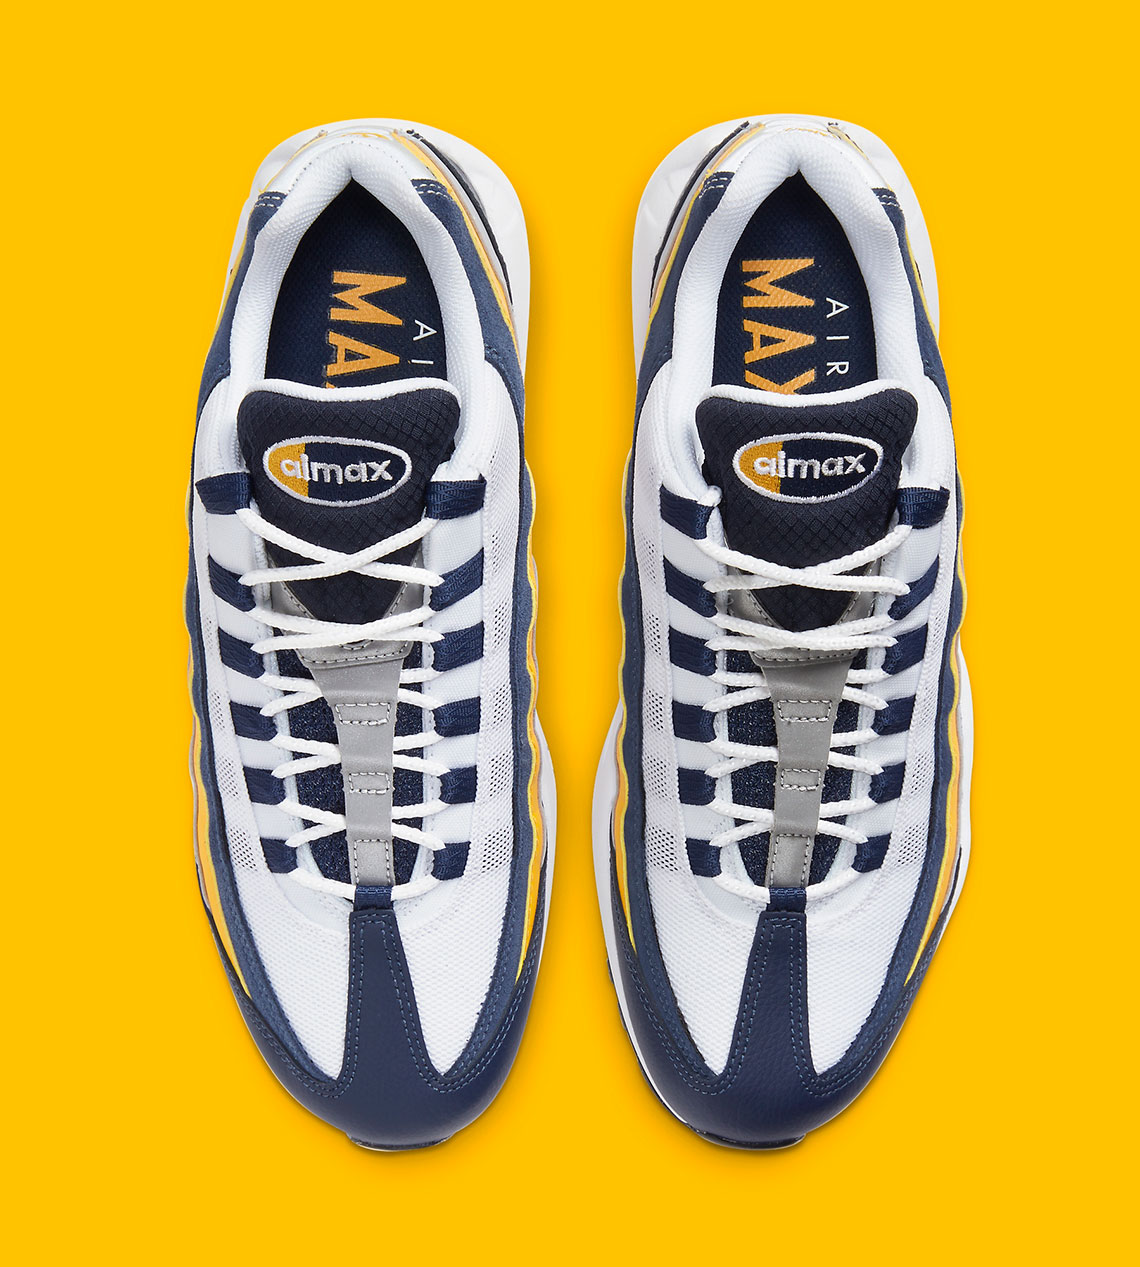 nike limited edition wholesale shoes White Navy Gold Cz0191 400 1